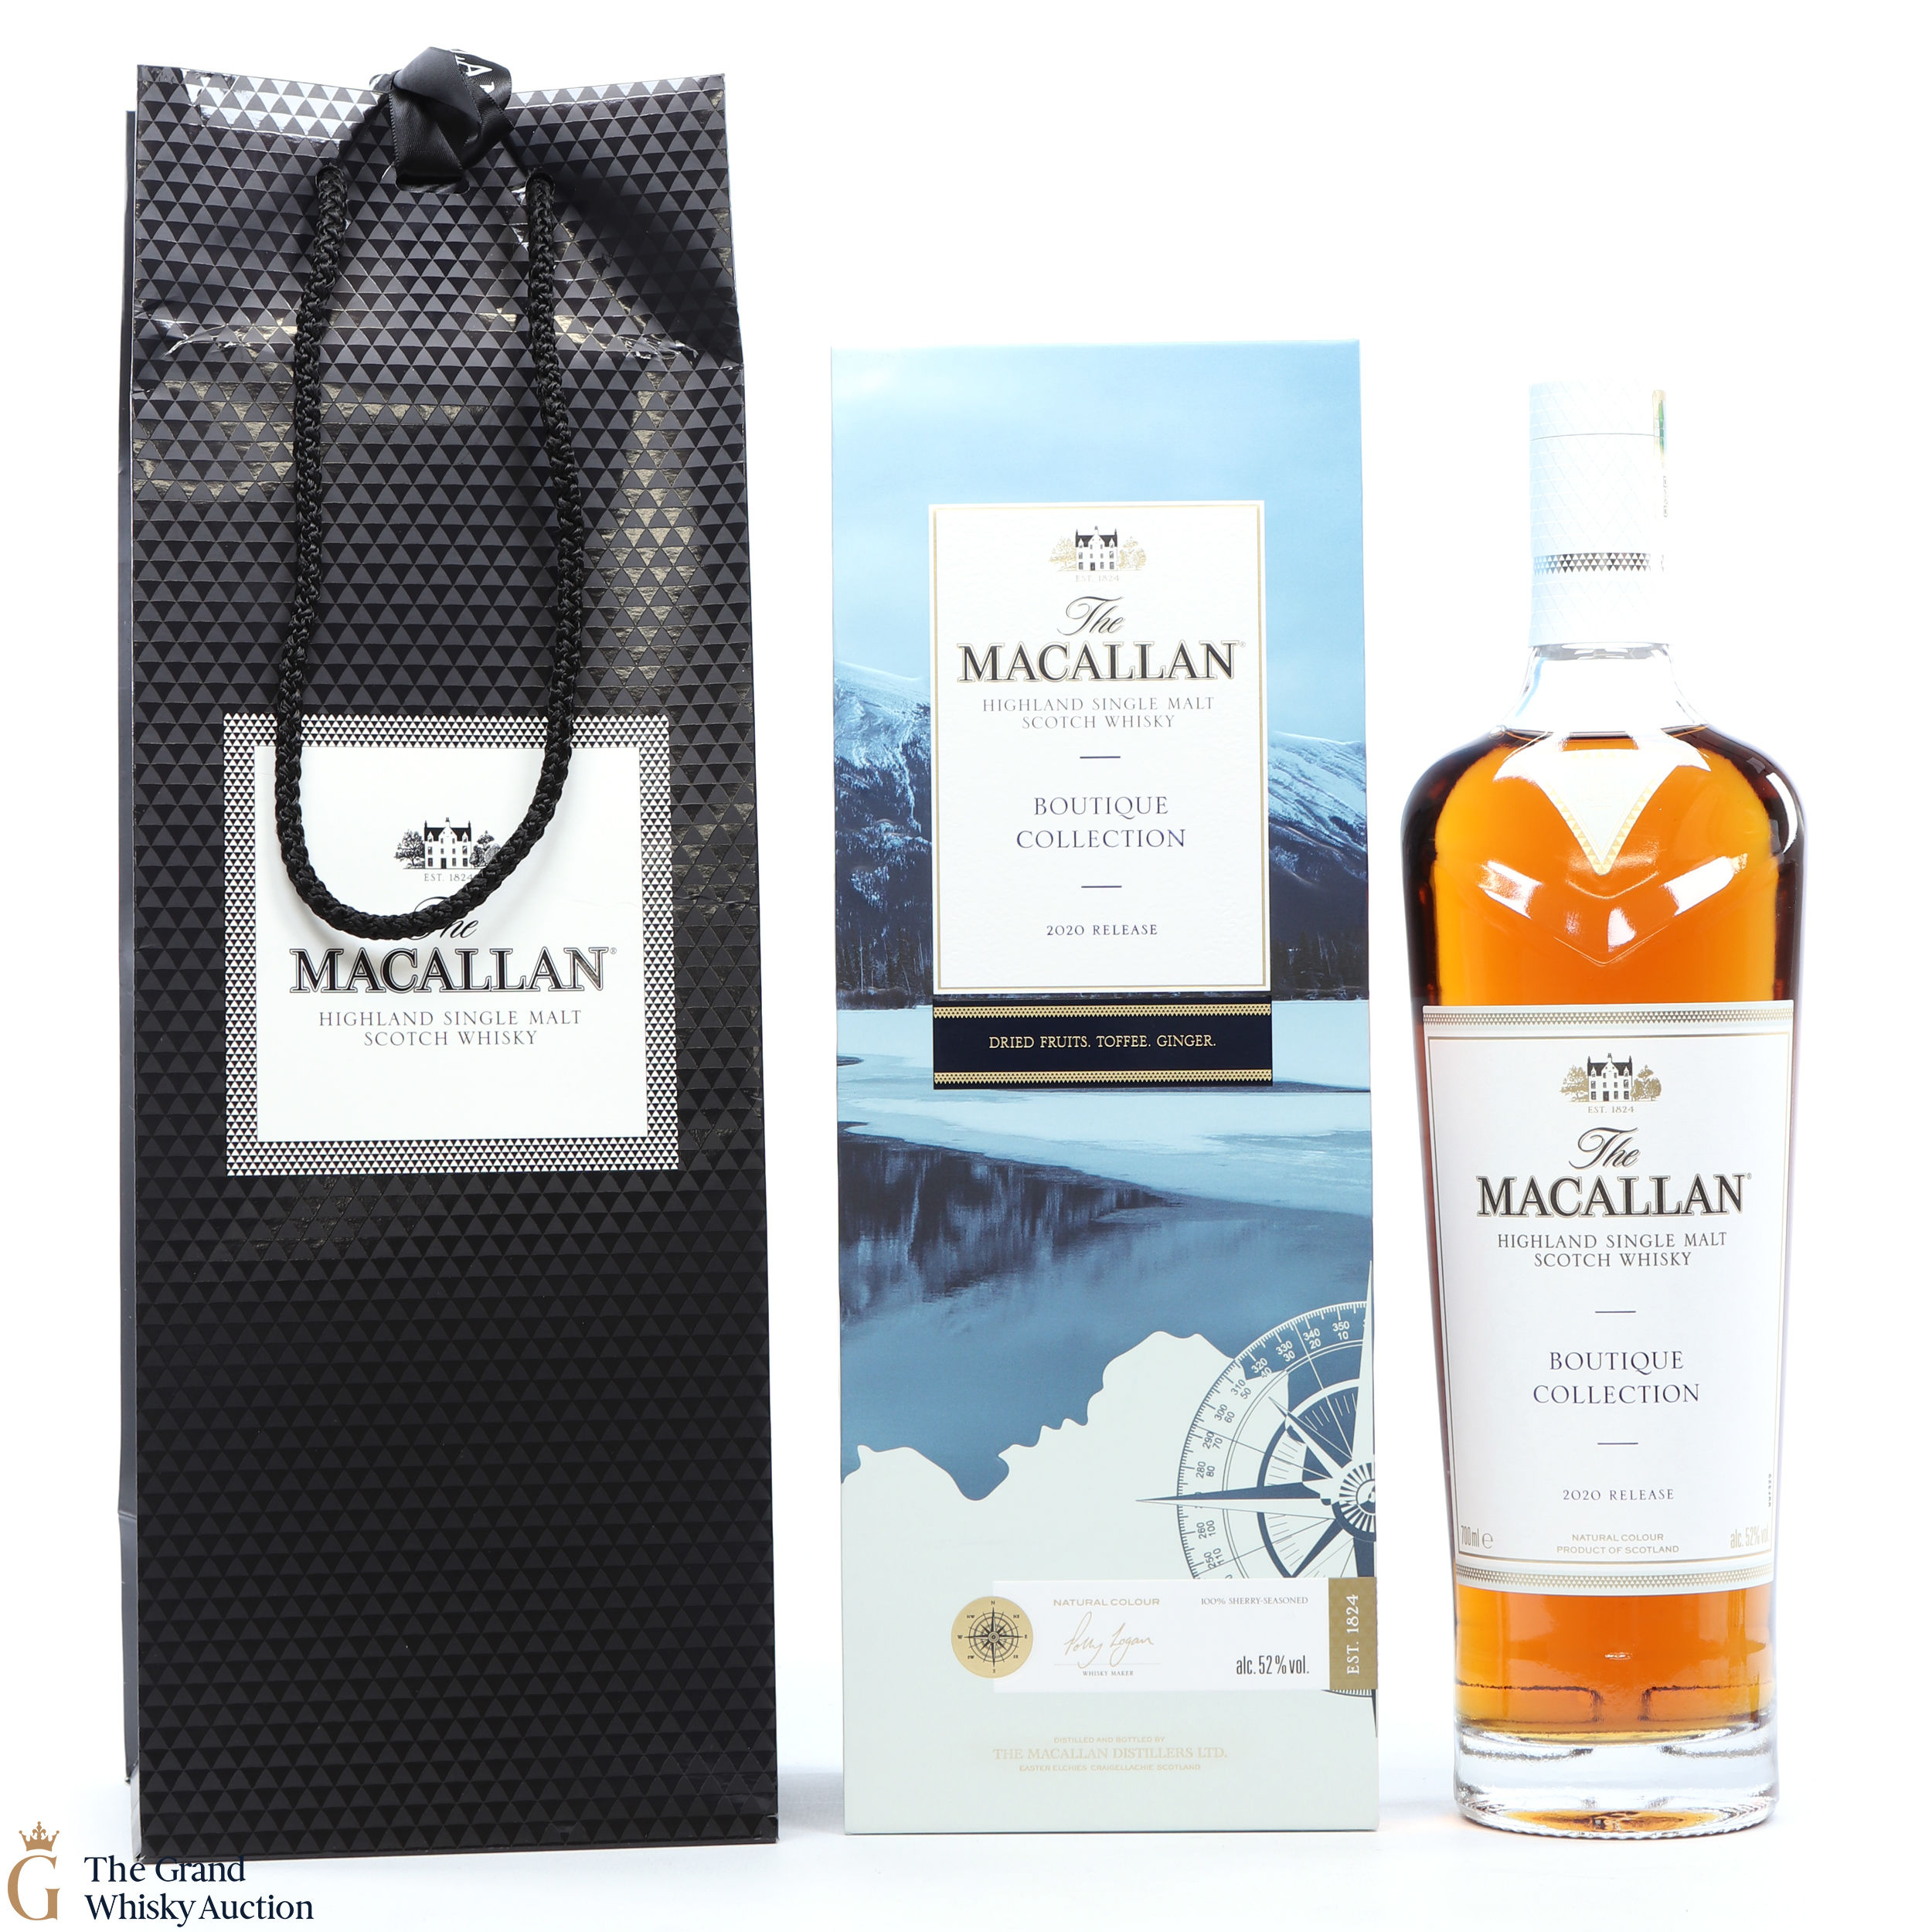 Macallan Boutique Collection 2020 Auction The Grand Whisky Auction